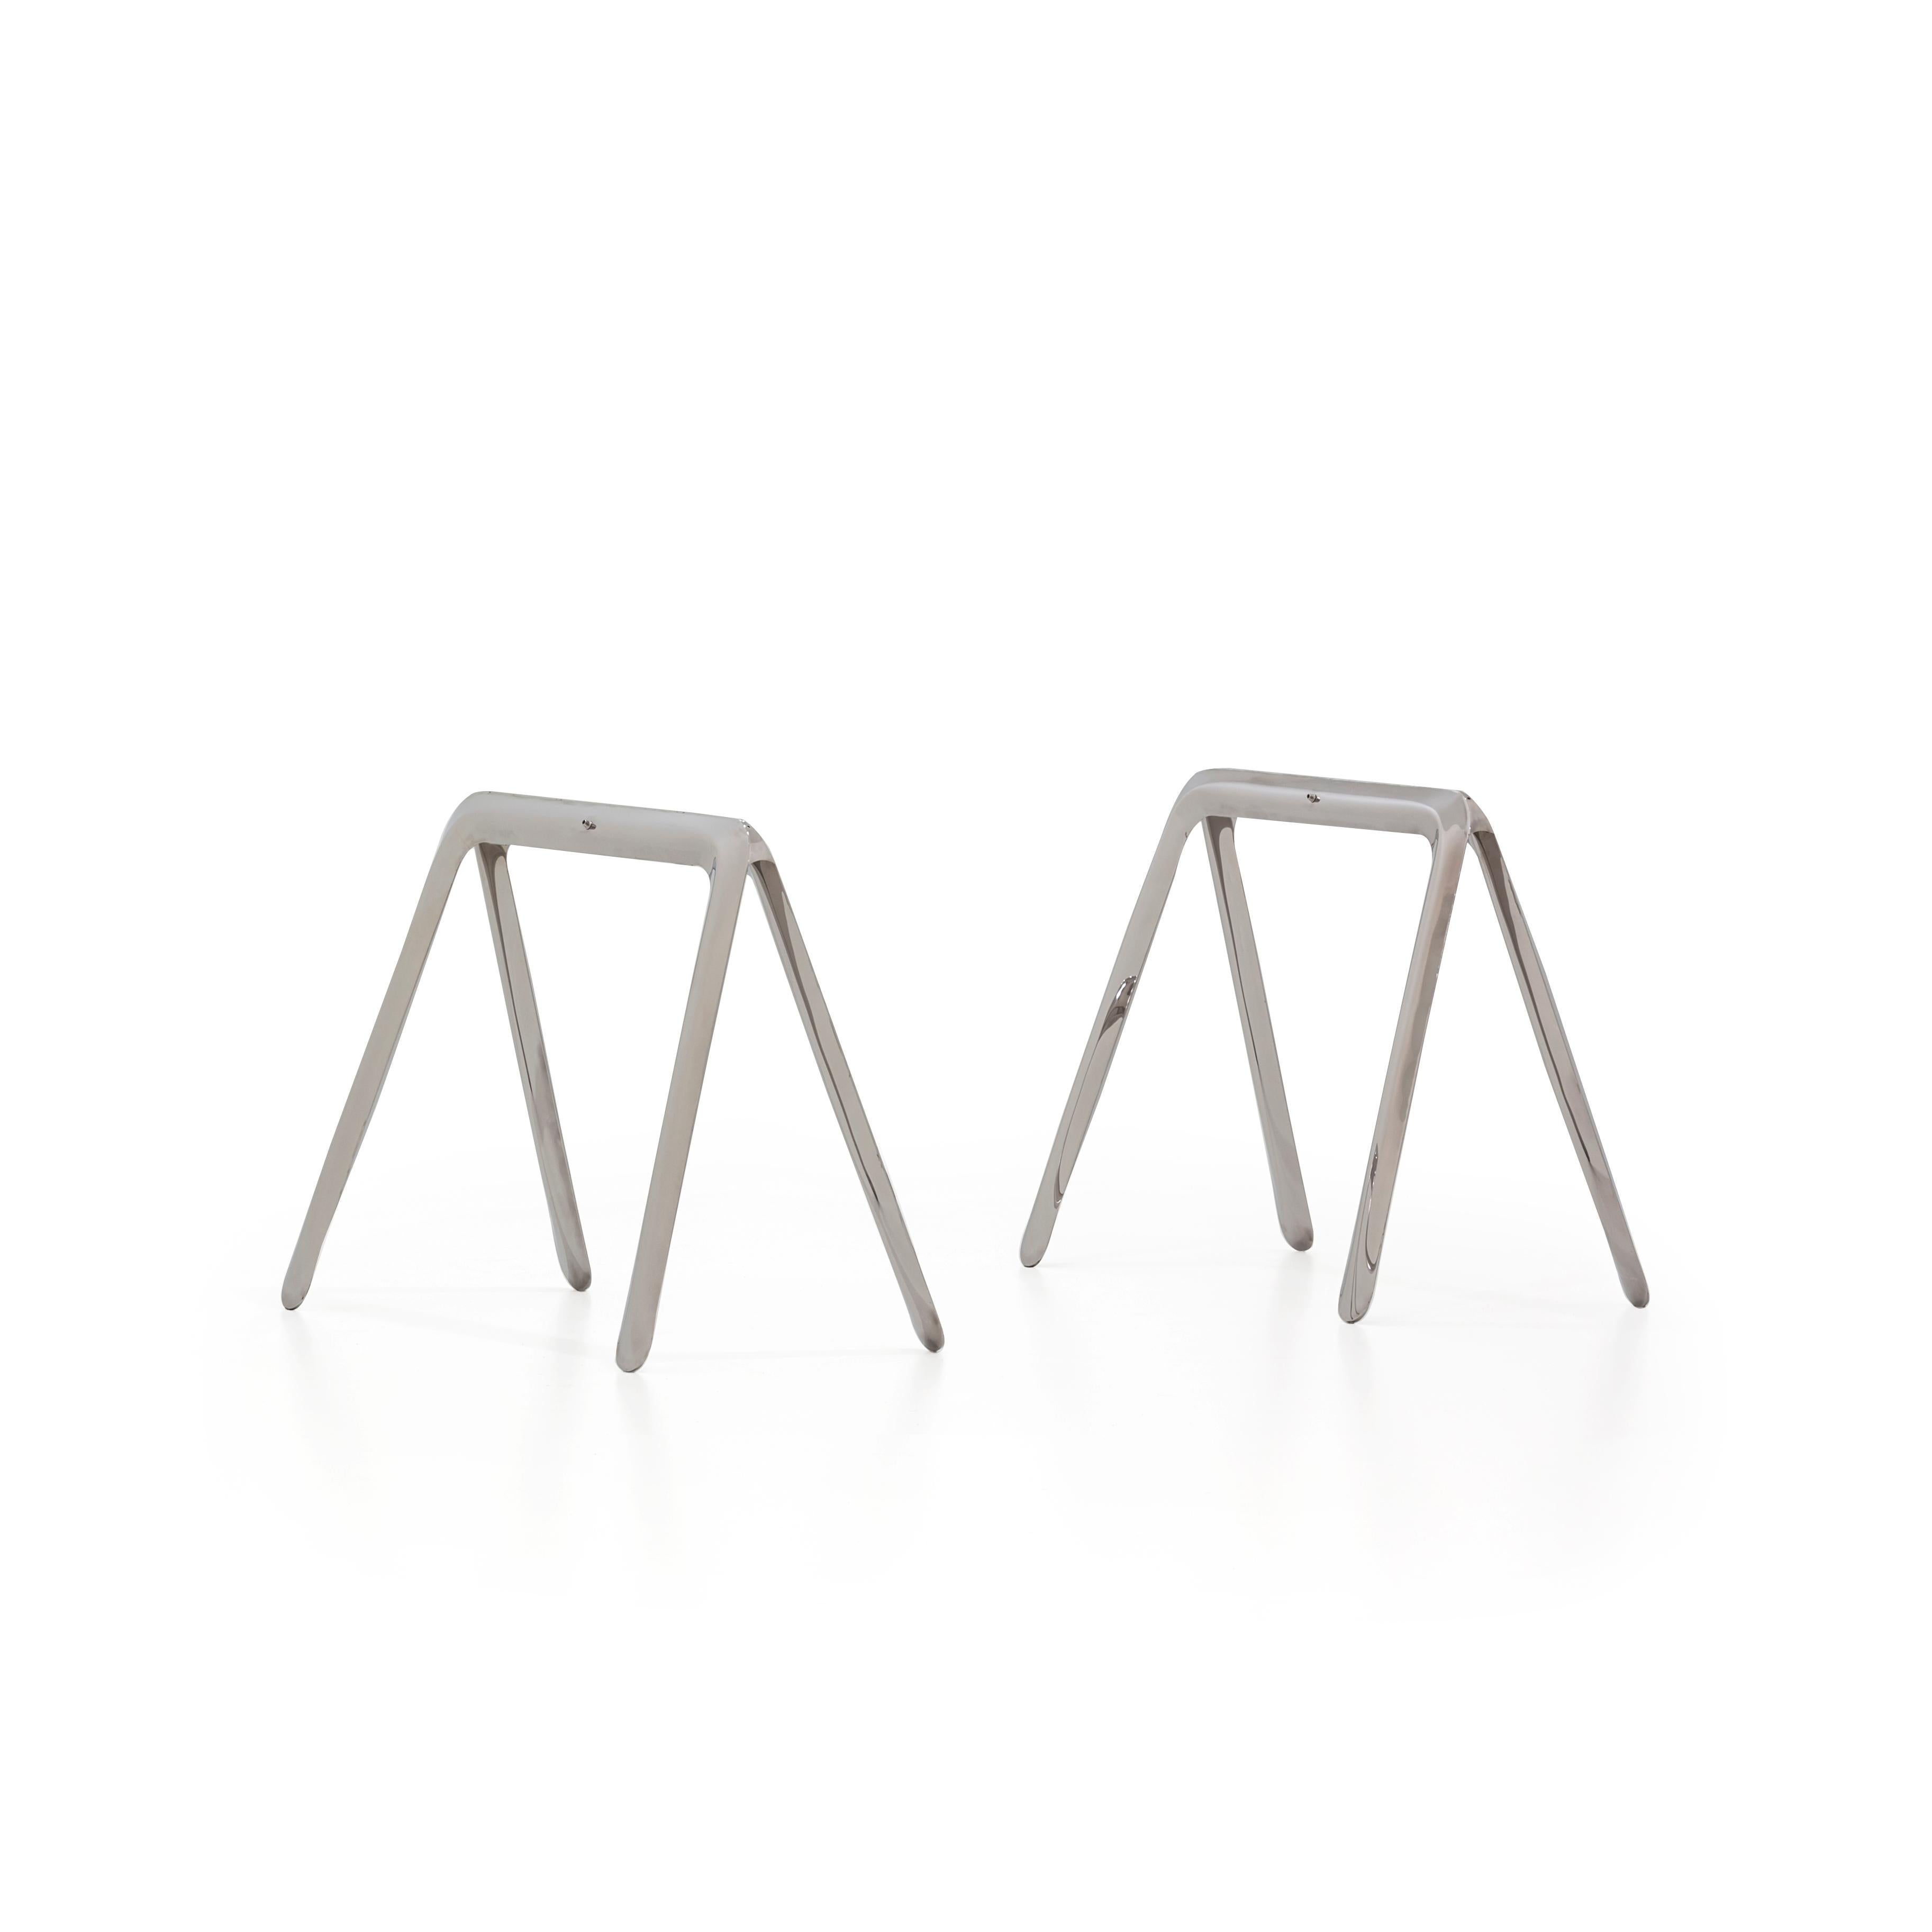 Polish Pair of Koza Trestles in Stainless Steel by Zieta For Sale